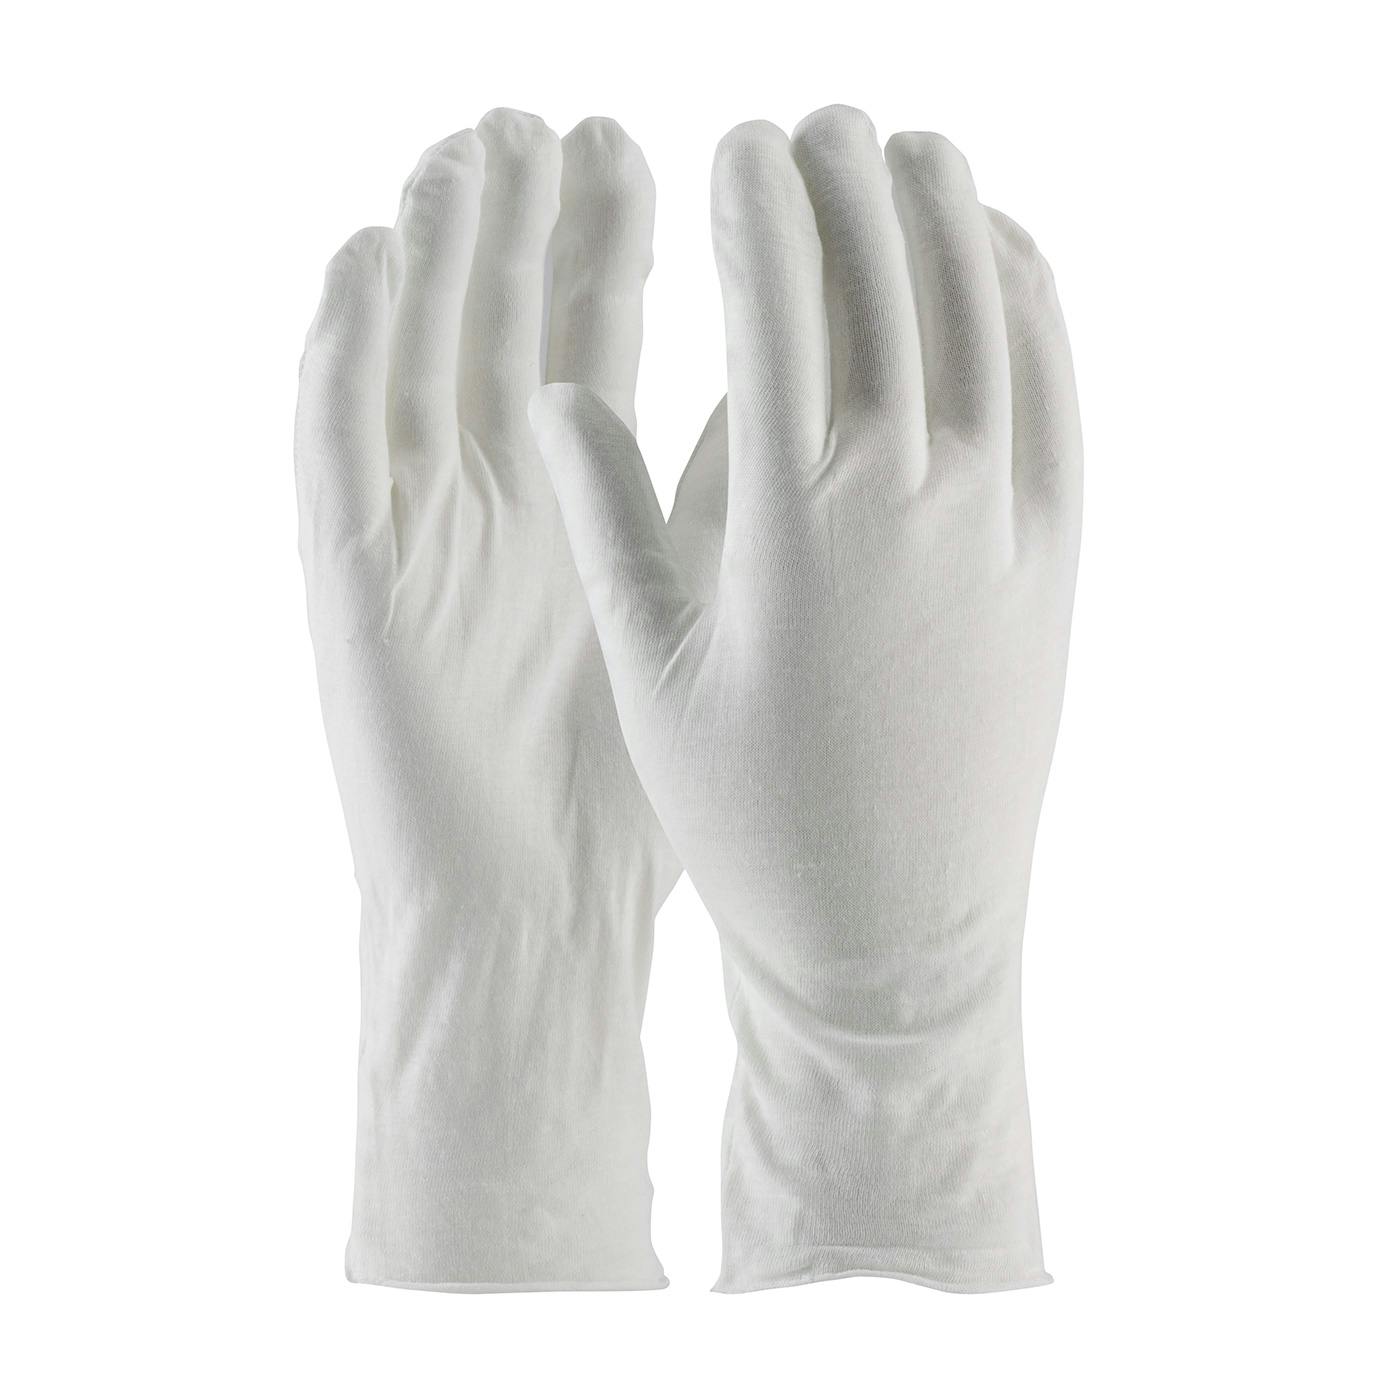 Medium Weight Cotton Lisle Inspection Glove with Unhemmed Cuff - 12", White (97-520/12) - MENS